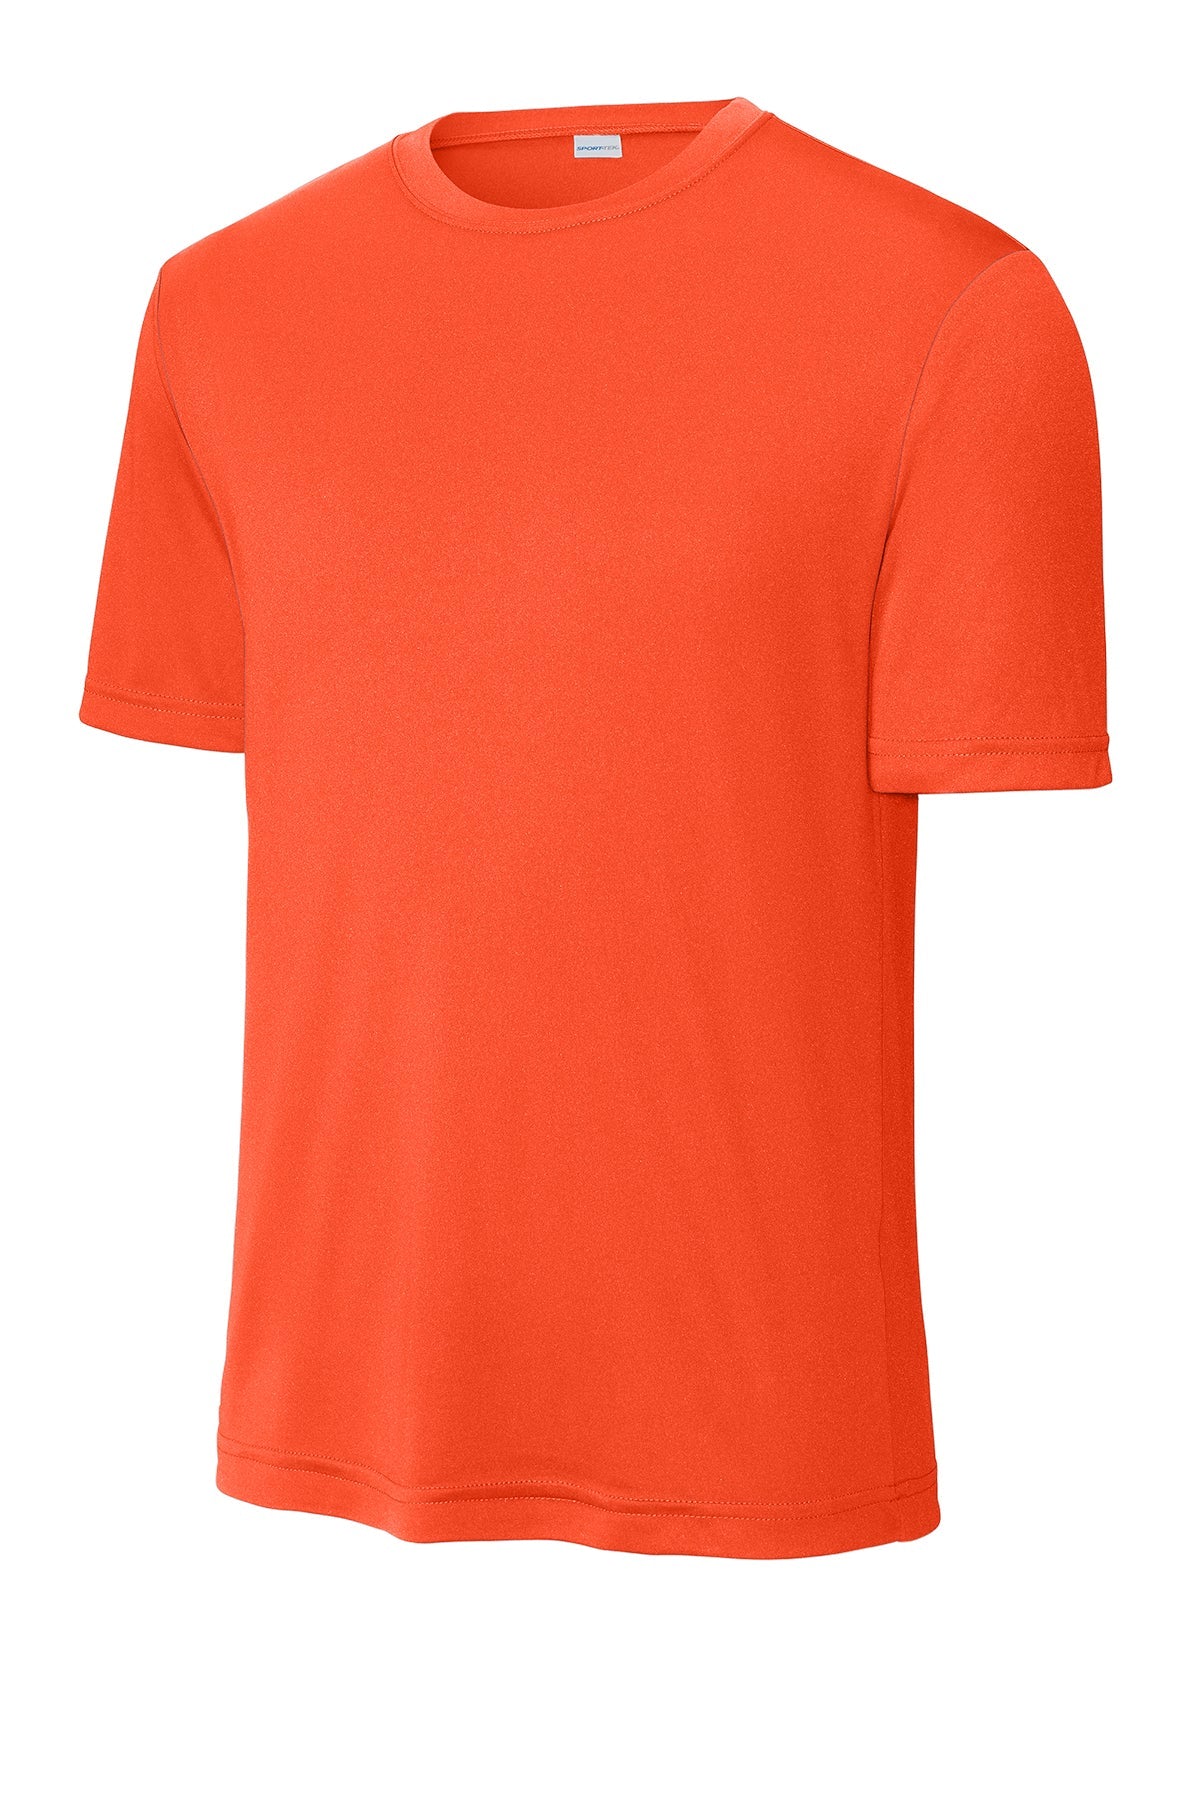 ST350 Sport-Tek® PosiCharge® Competitor™ Tee. XS-4XL